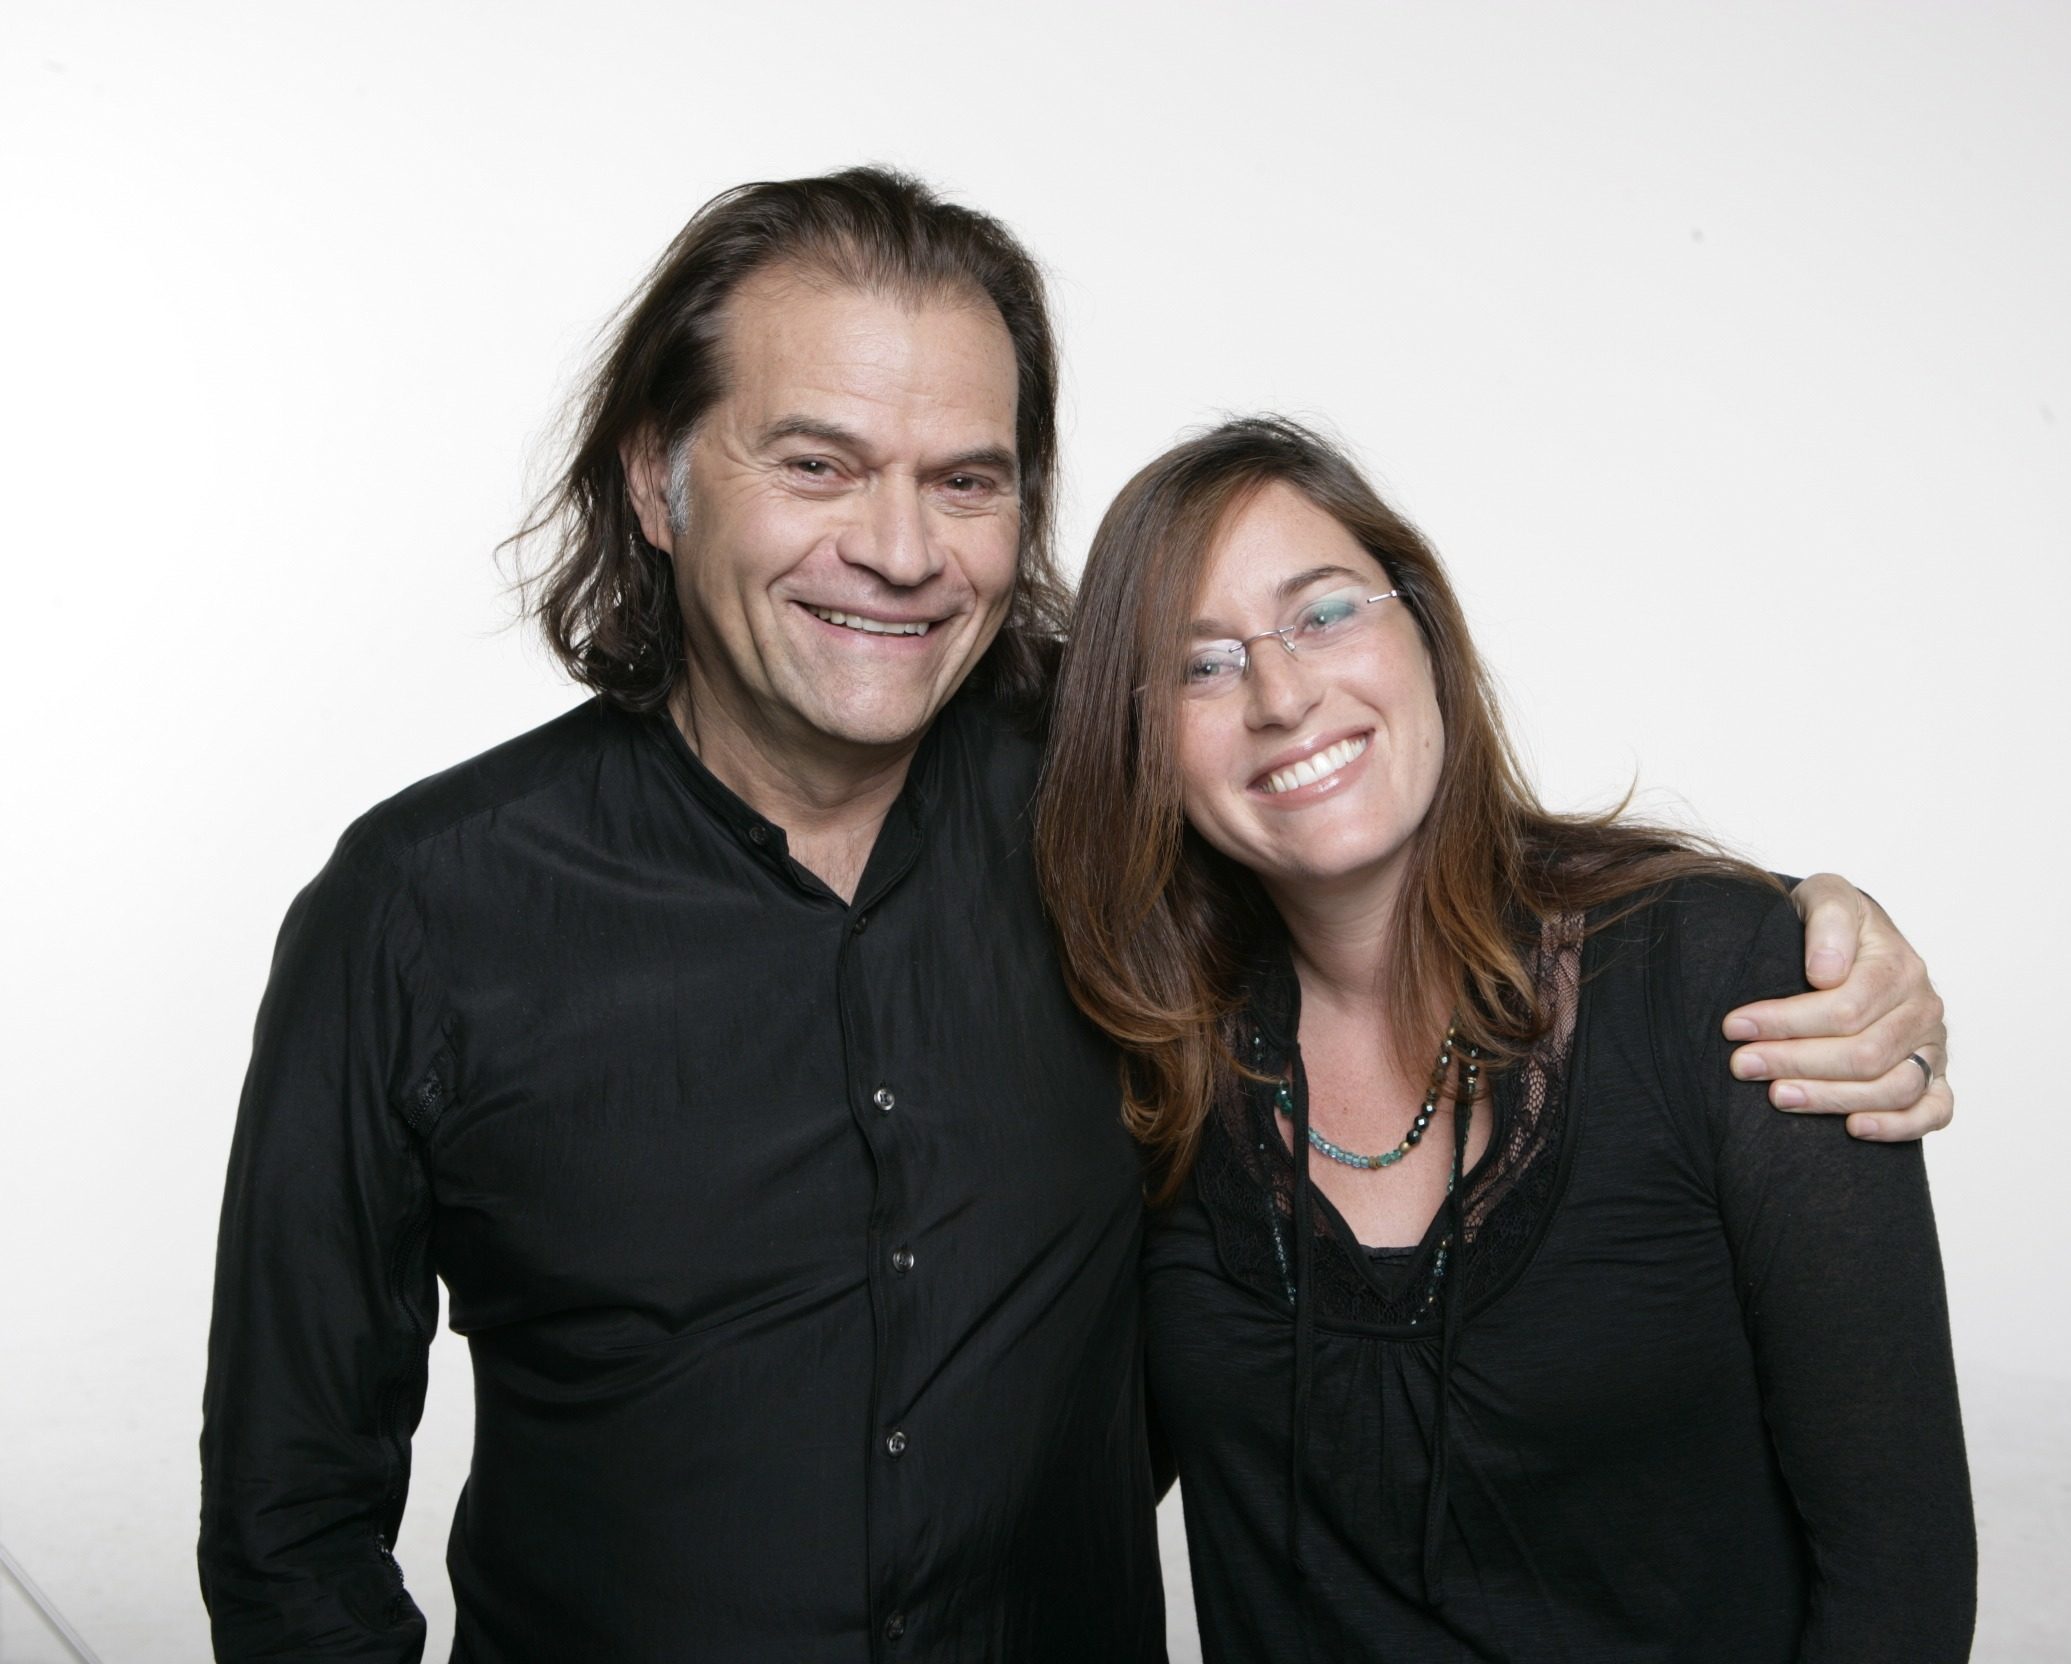 Brian Sherman AM and Ondine Sherman, Co-founders of Voiceless